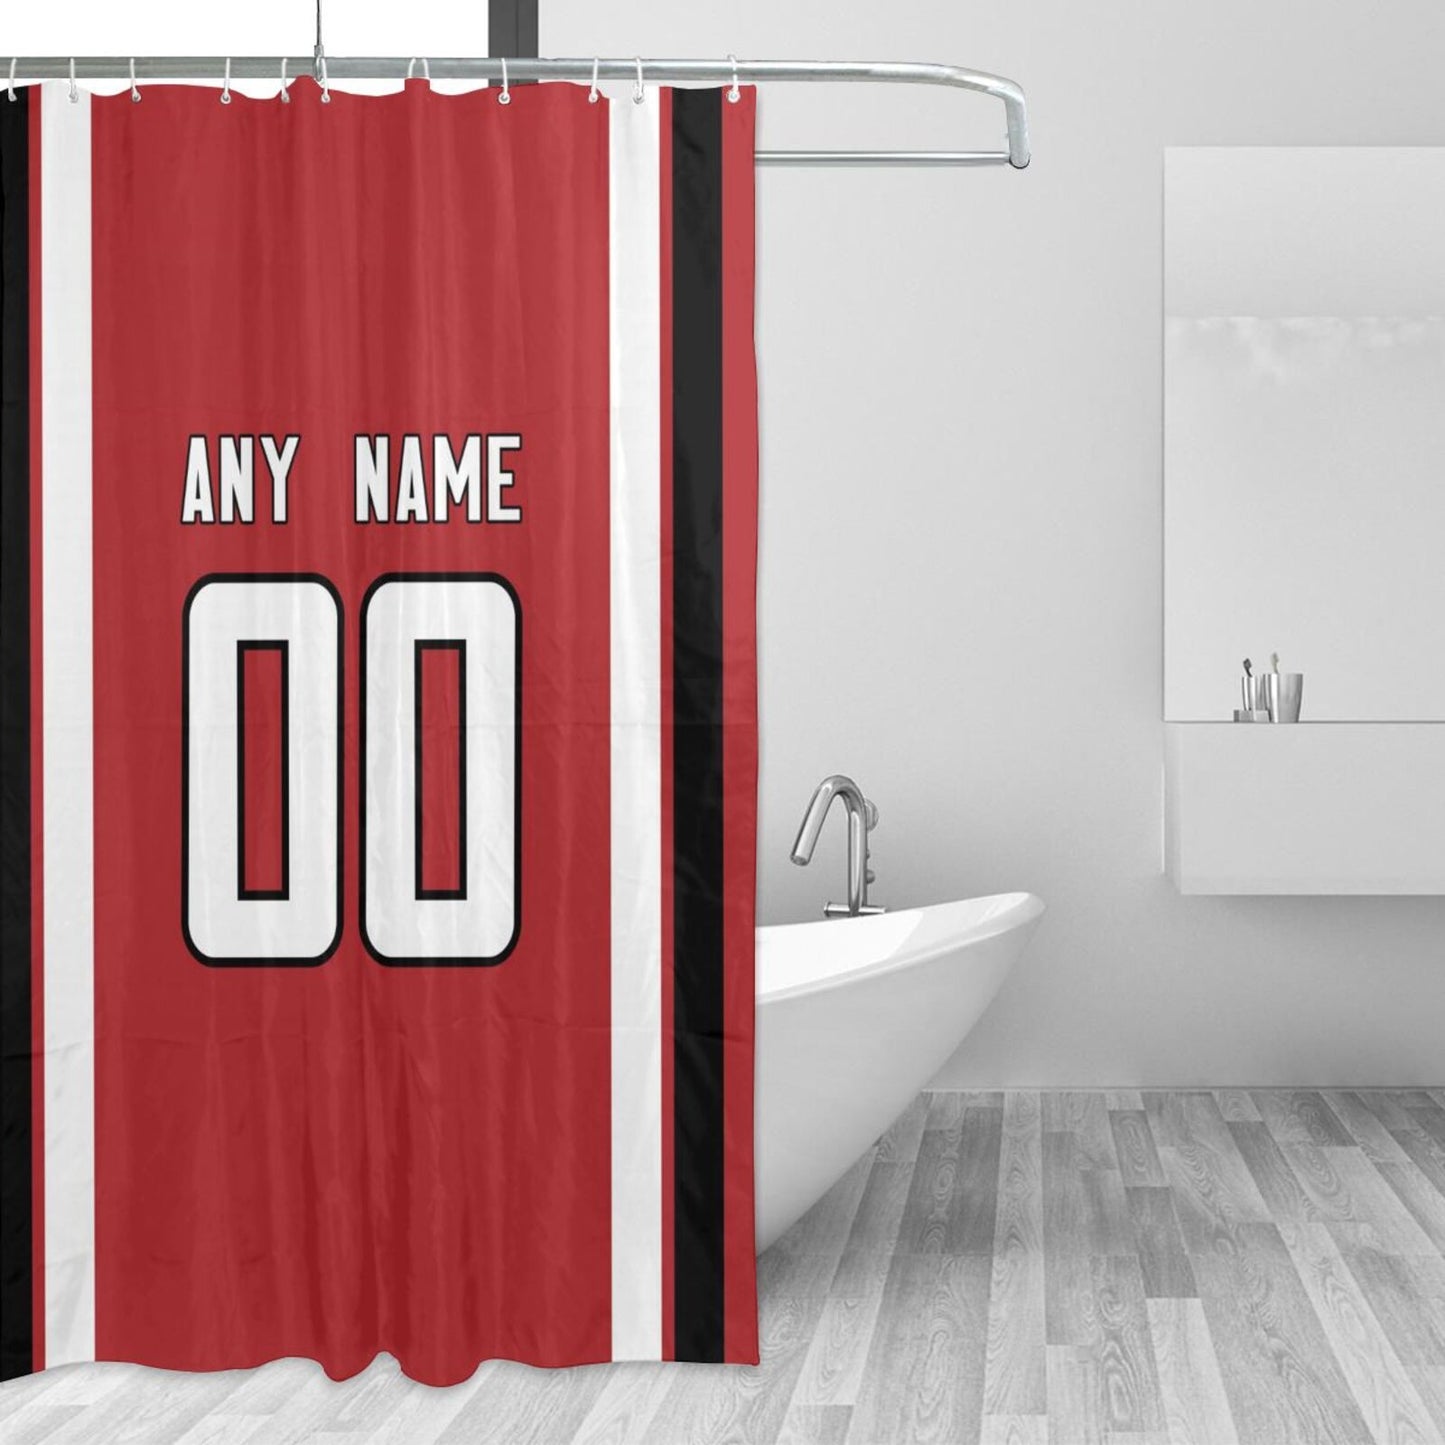 Custom Football Atlanta Falcons style personalized shower curtain custom design name and number set of 12 shower curtain hooks Rings